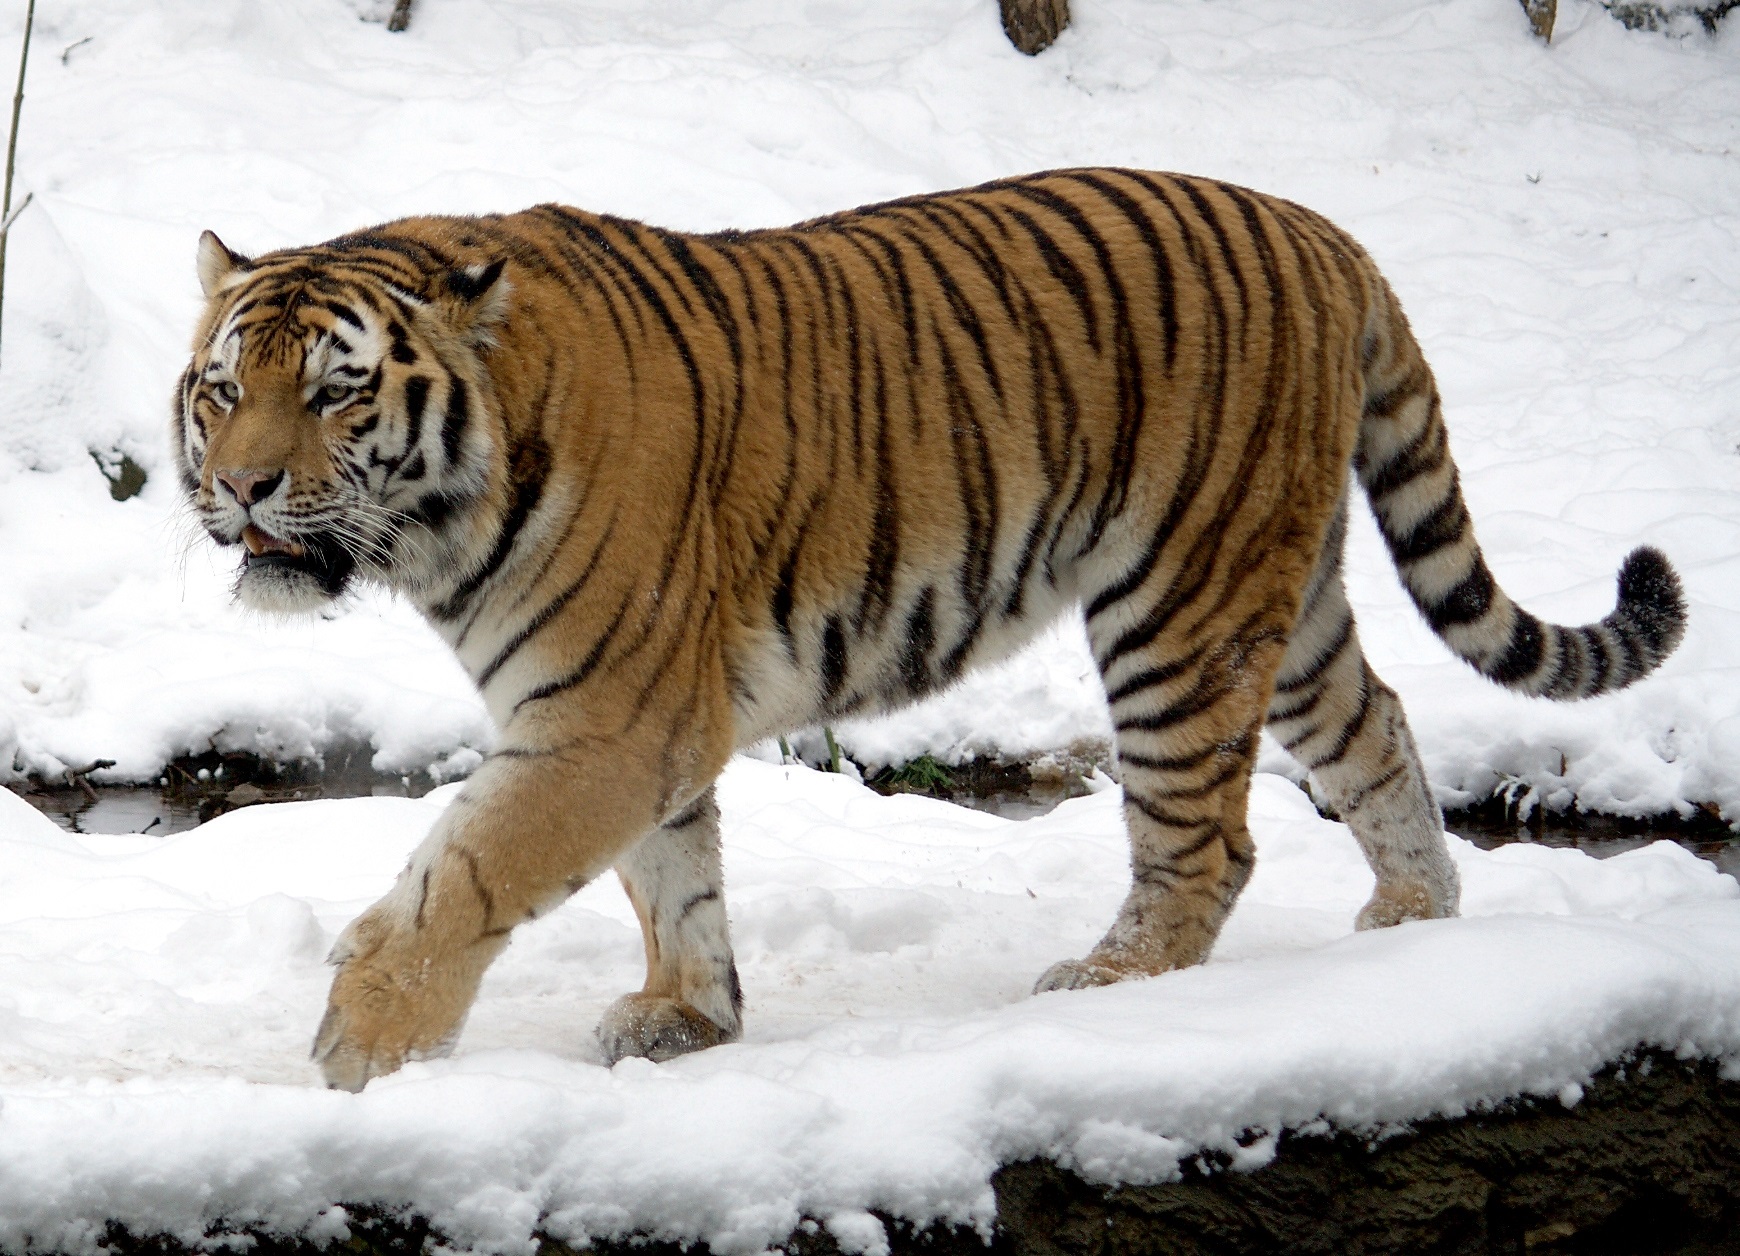 What is the gestation period of an Amur tiger?